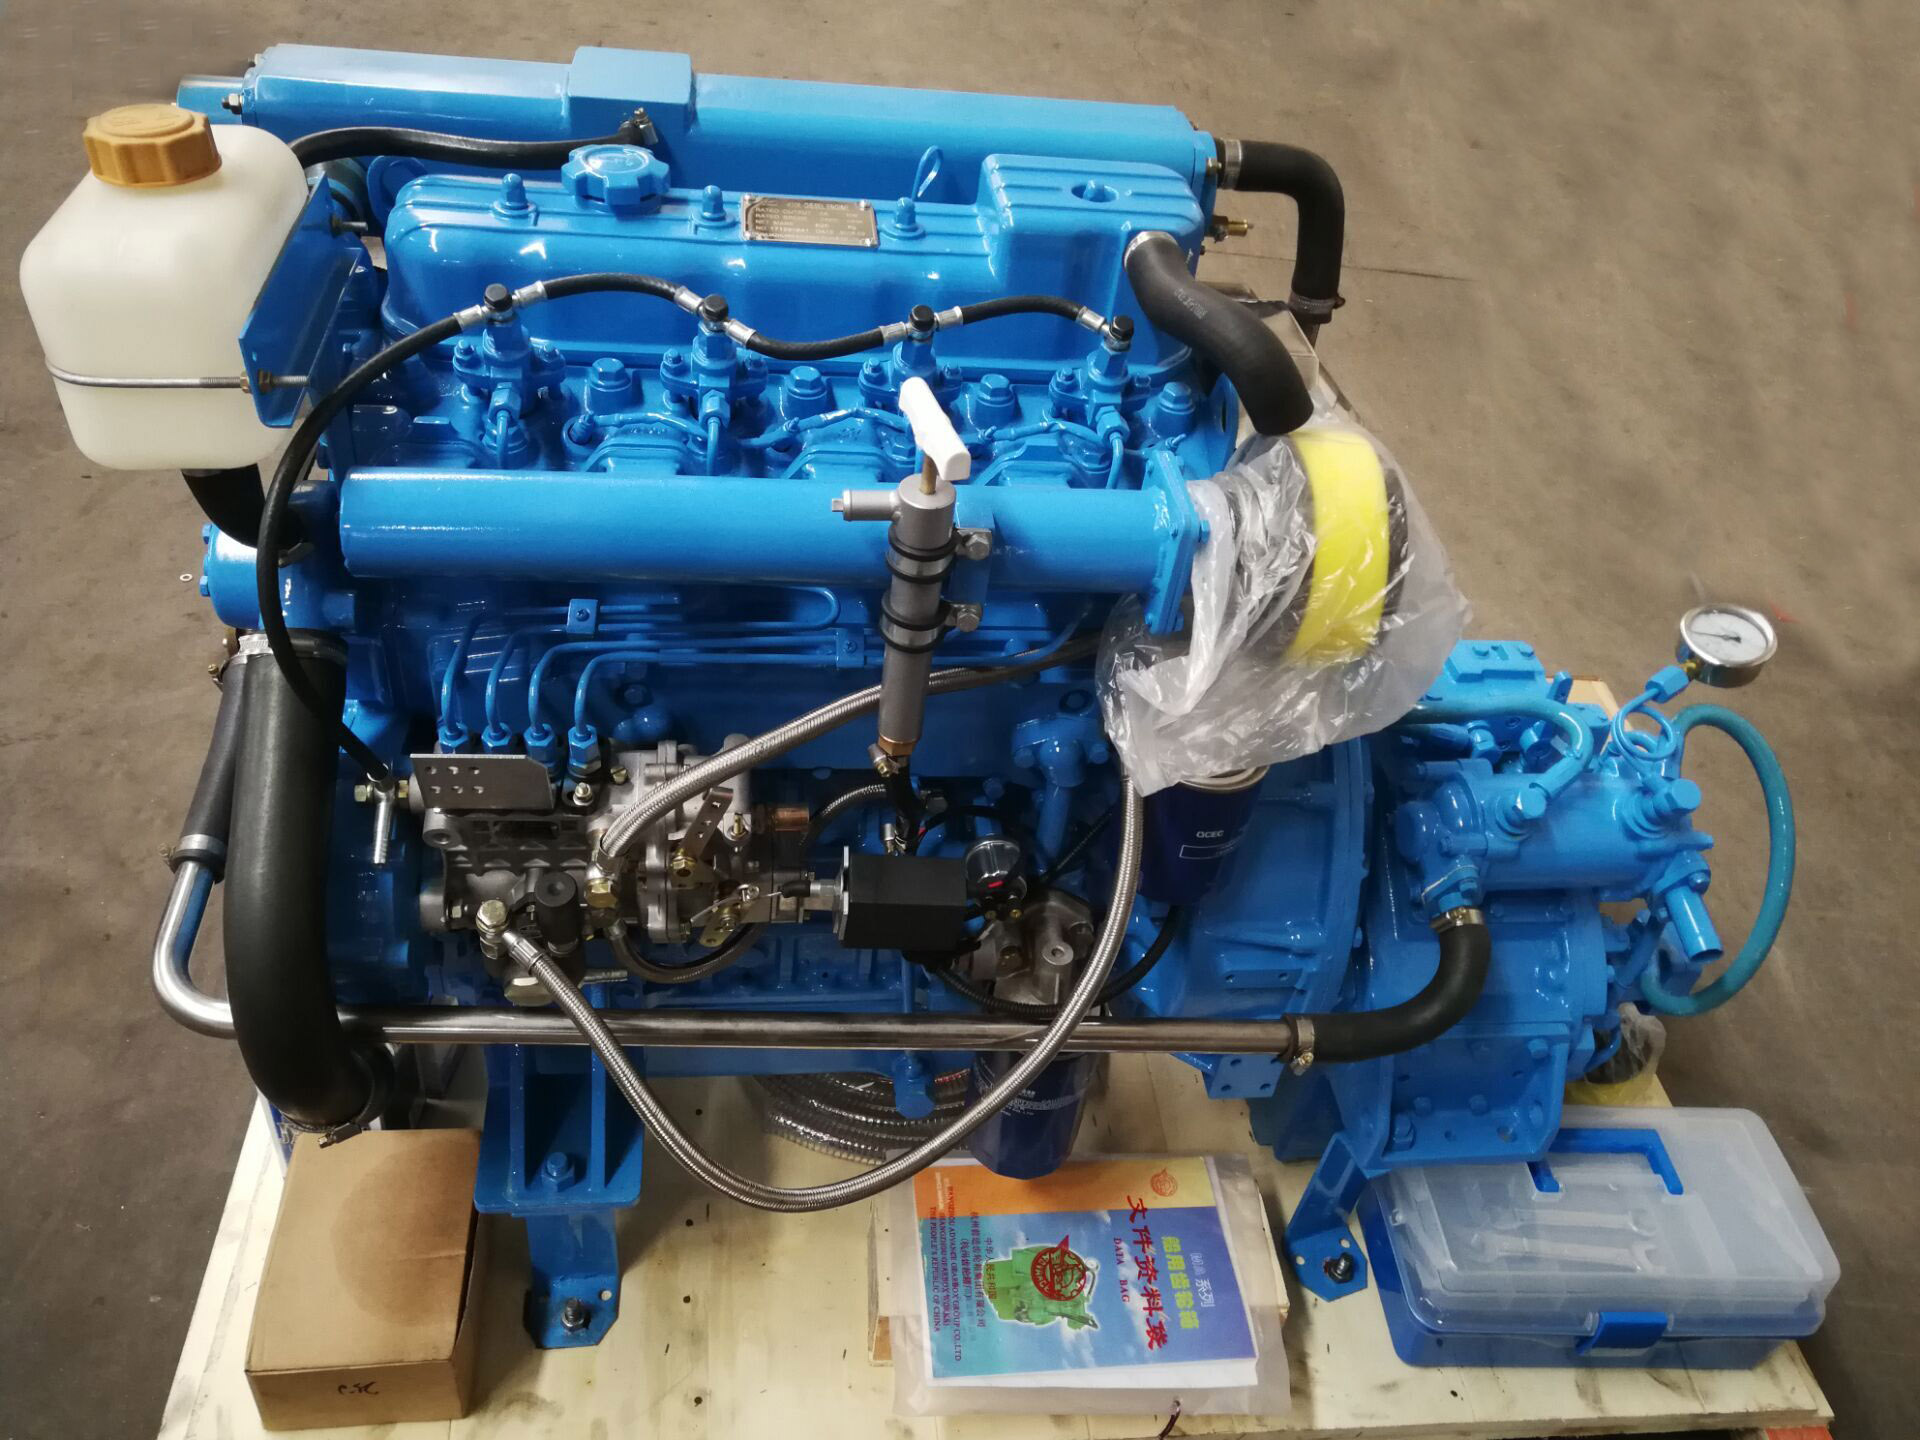 Chevy 4 Cylinder Engines For Sale